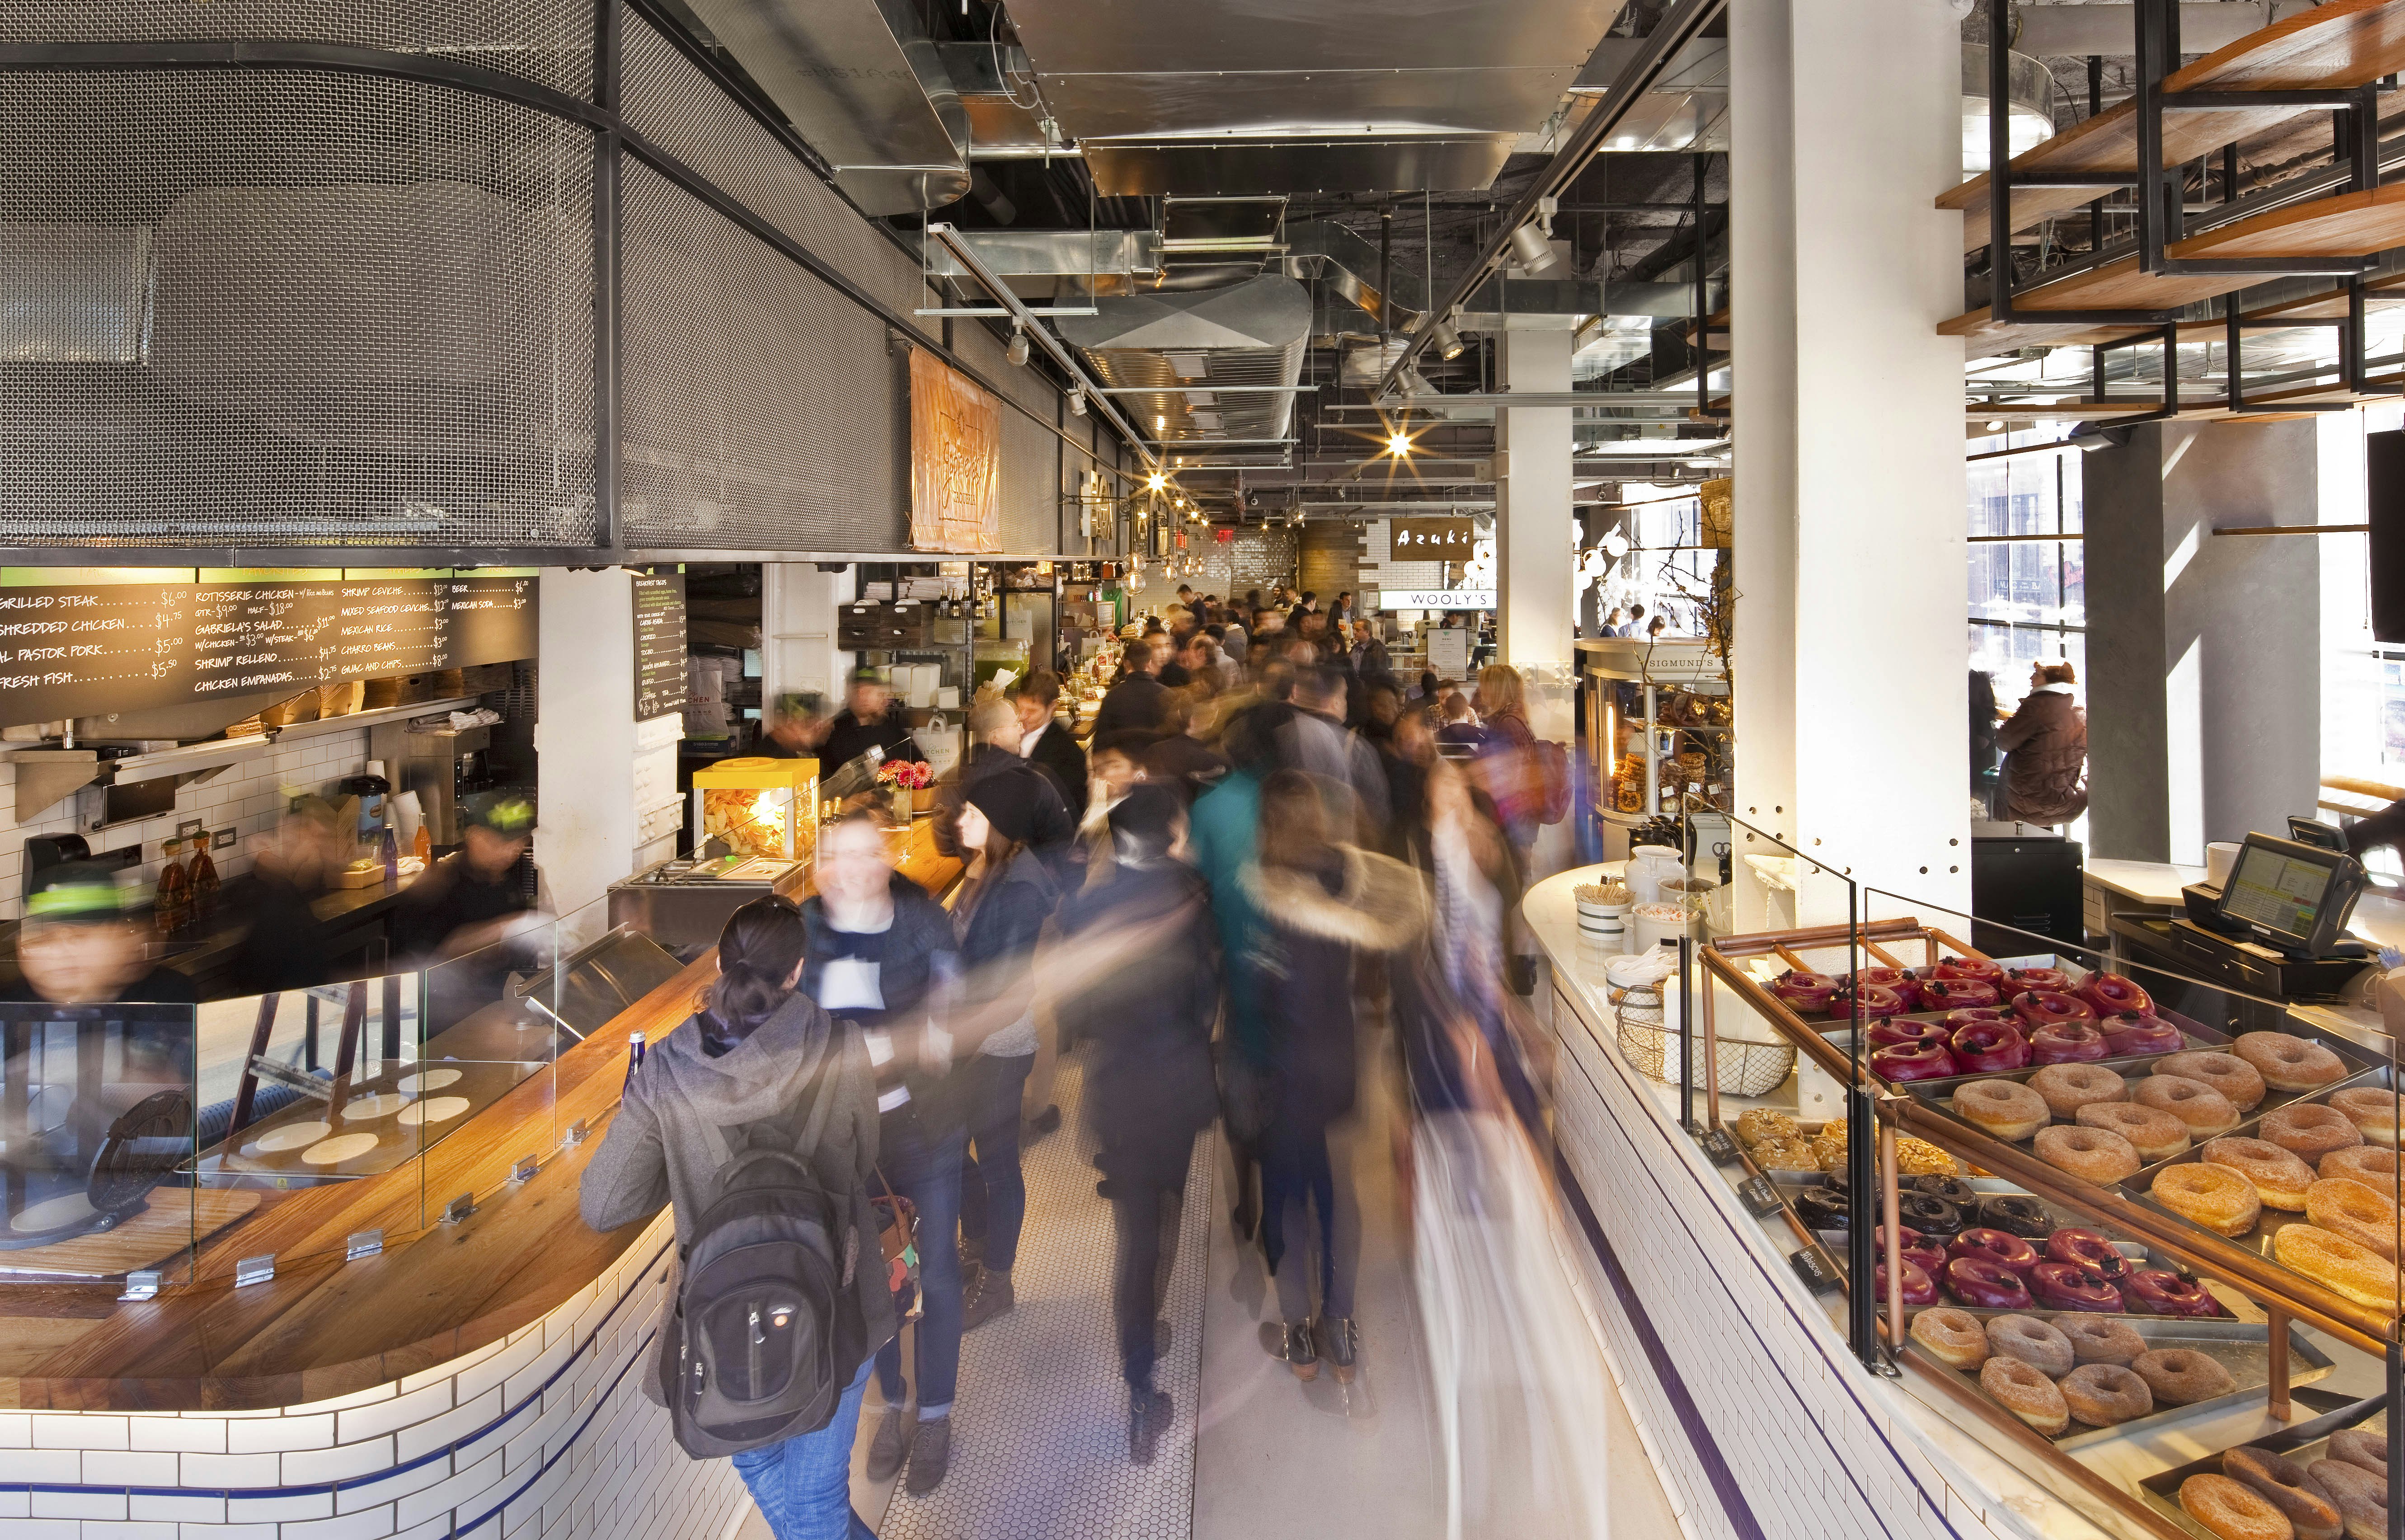 Long exposure shot of the interior of City Kitchen food hall. The delicious food on display can be seen clearly, while the patrons are a blur.